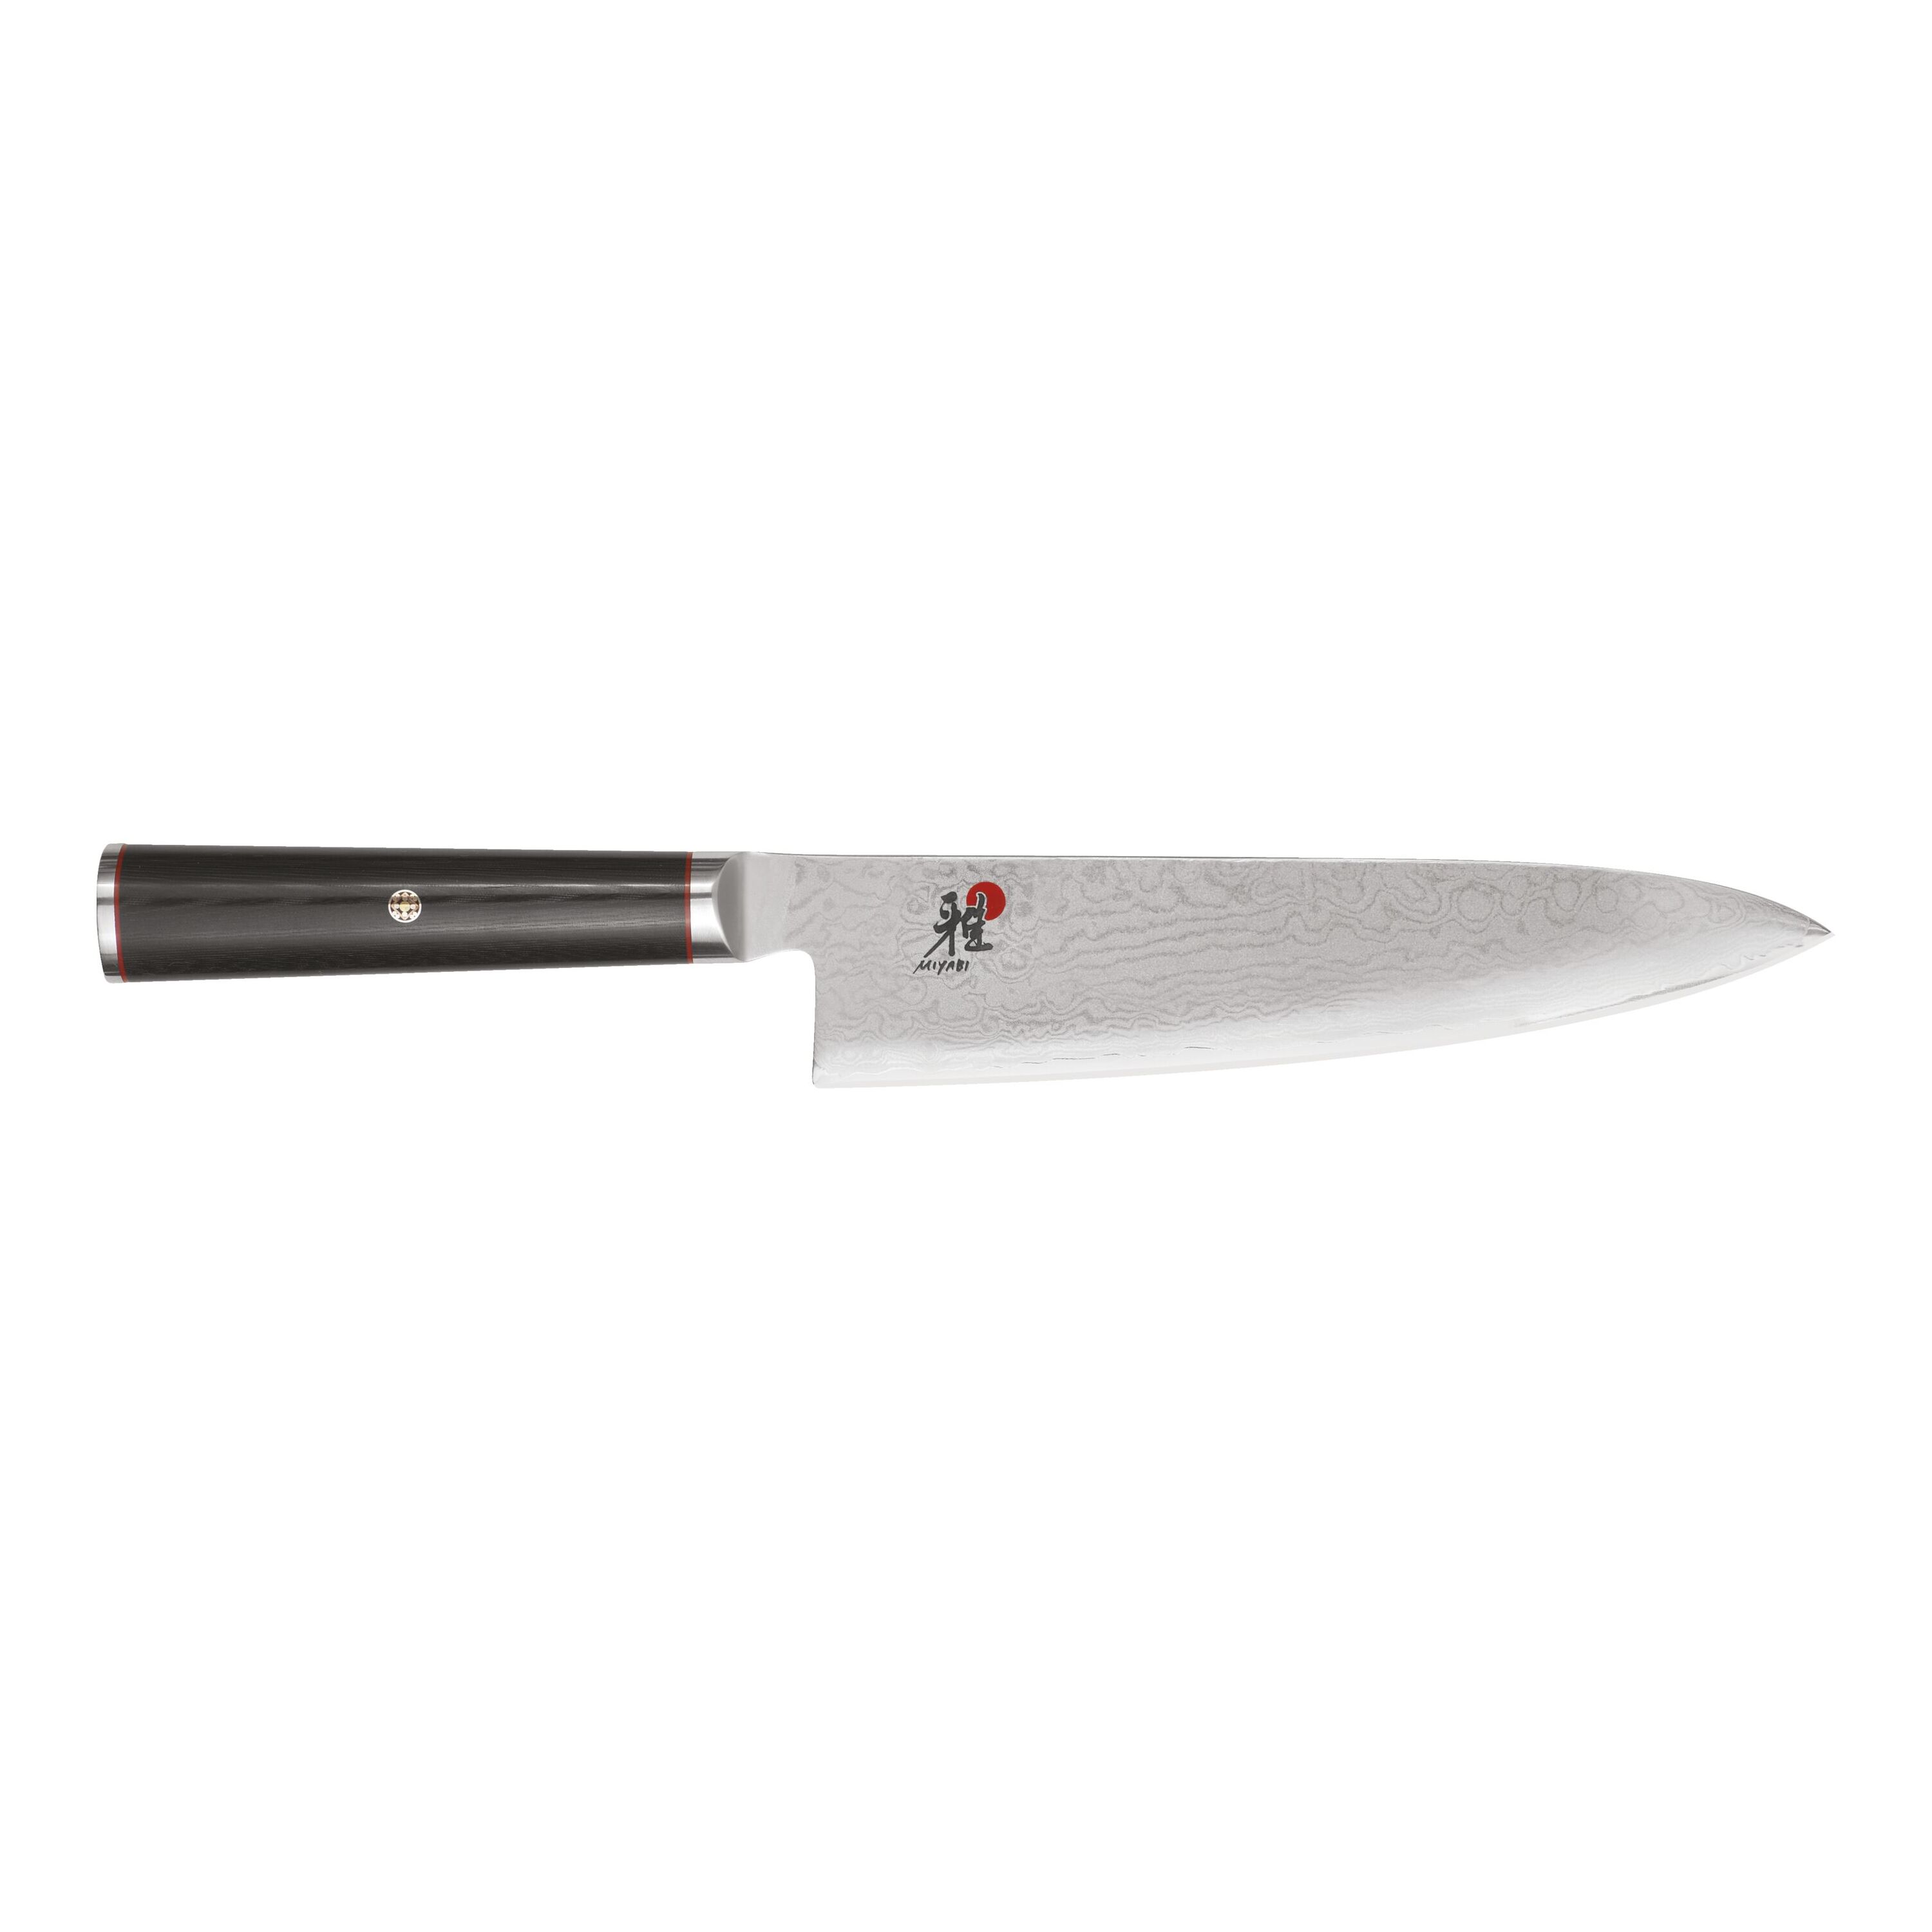  Global Model X Chef's Knife - Made in Japan, 8 (Fine